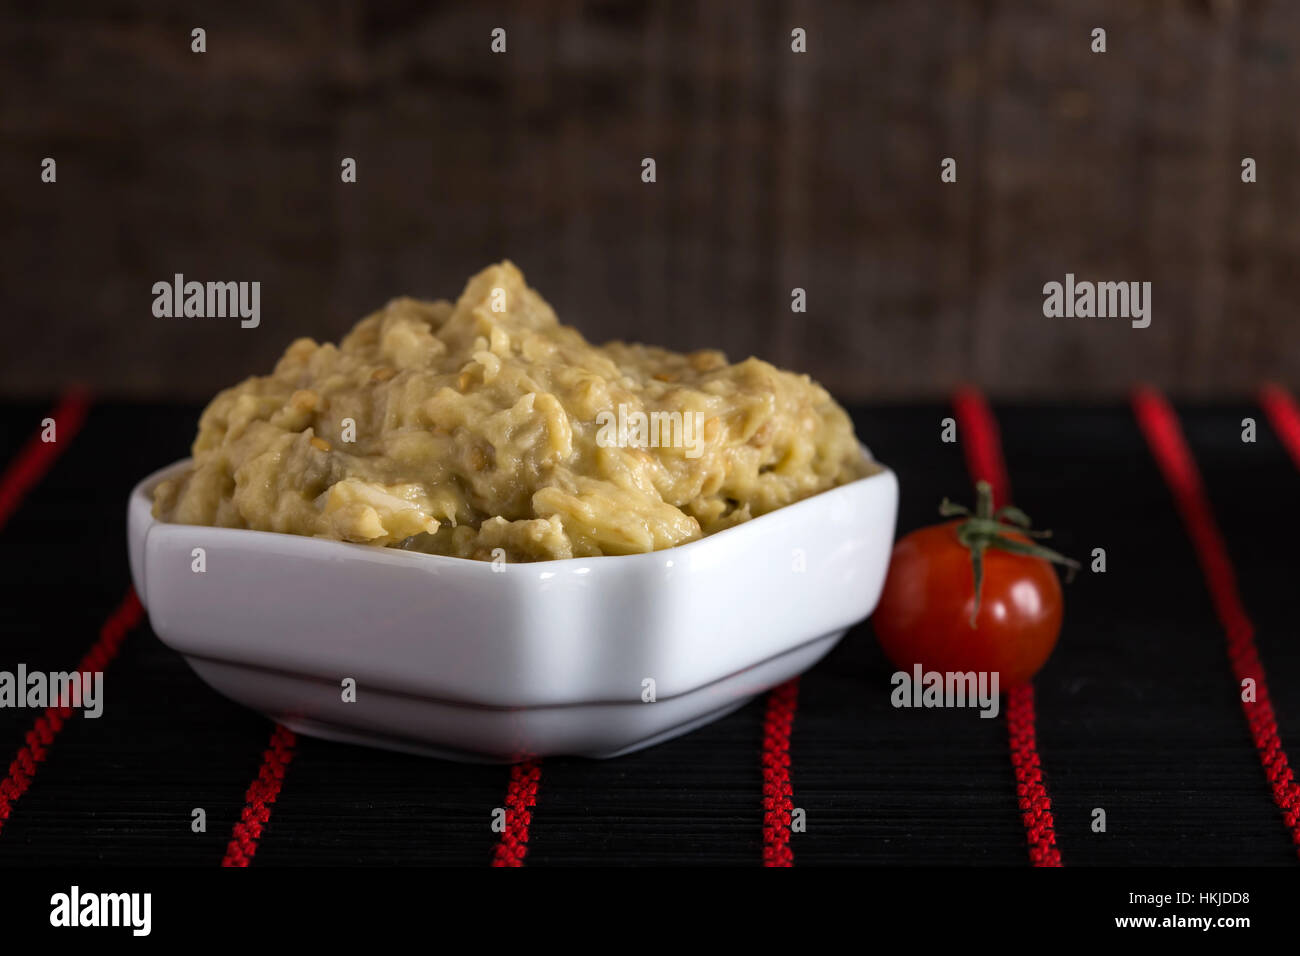 Eggplant salad with mayonnaise and onion and one cherry tomato on rug Stock Photo